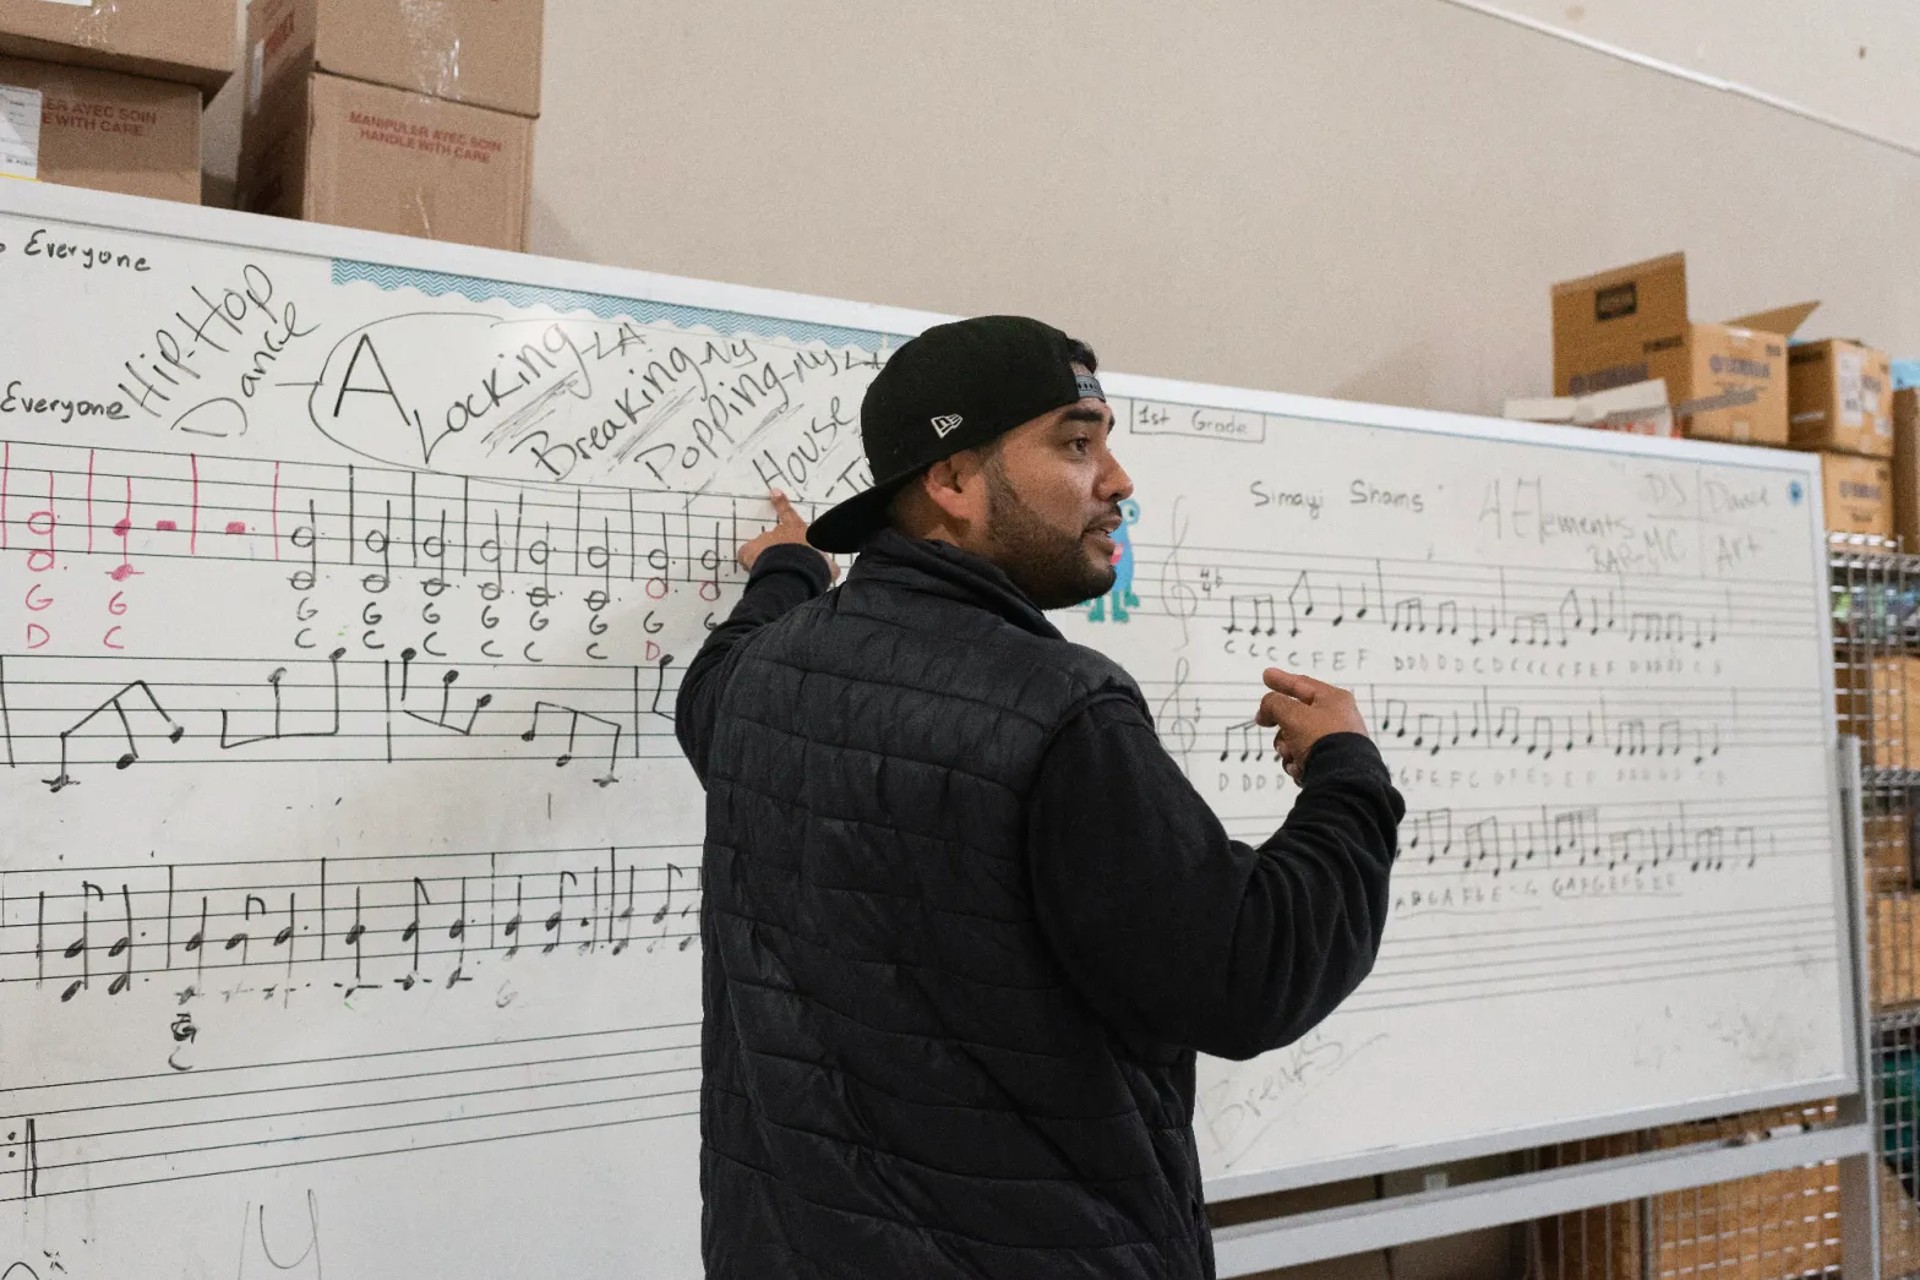 A man with a backward cap on stands in front of a whiteboard. Musical scales are written on the board. 